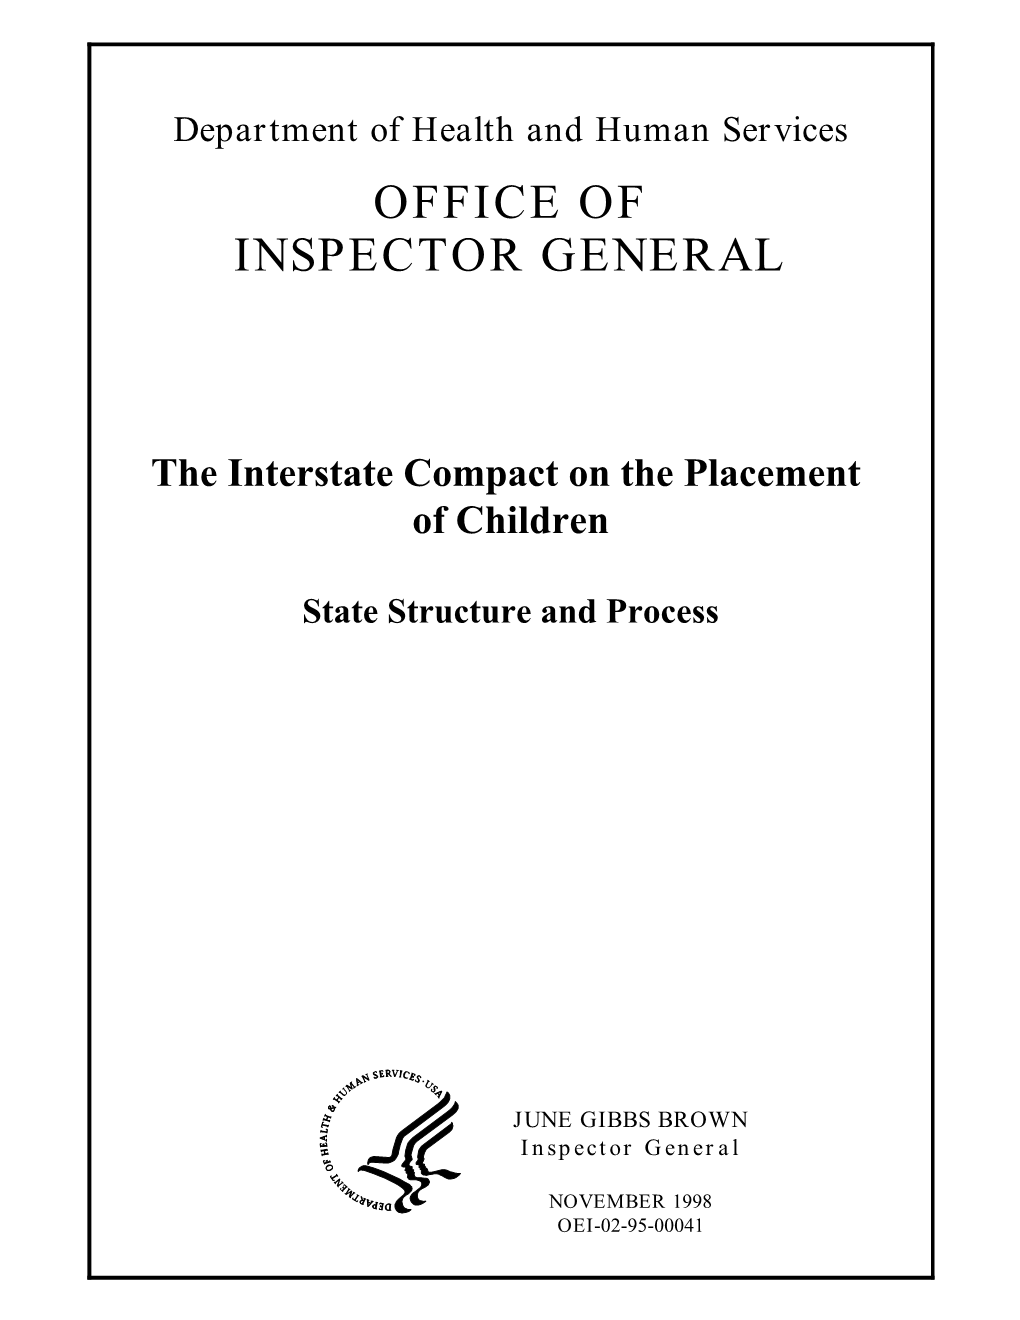 The Interstate Compact on the Placement of Children: State Structure and Process (OEI-02-95- 00041; 11/98)